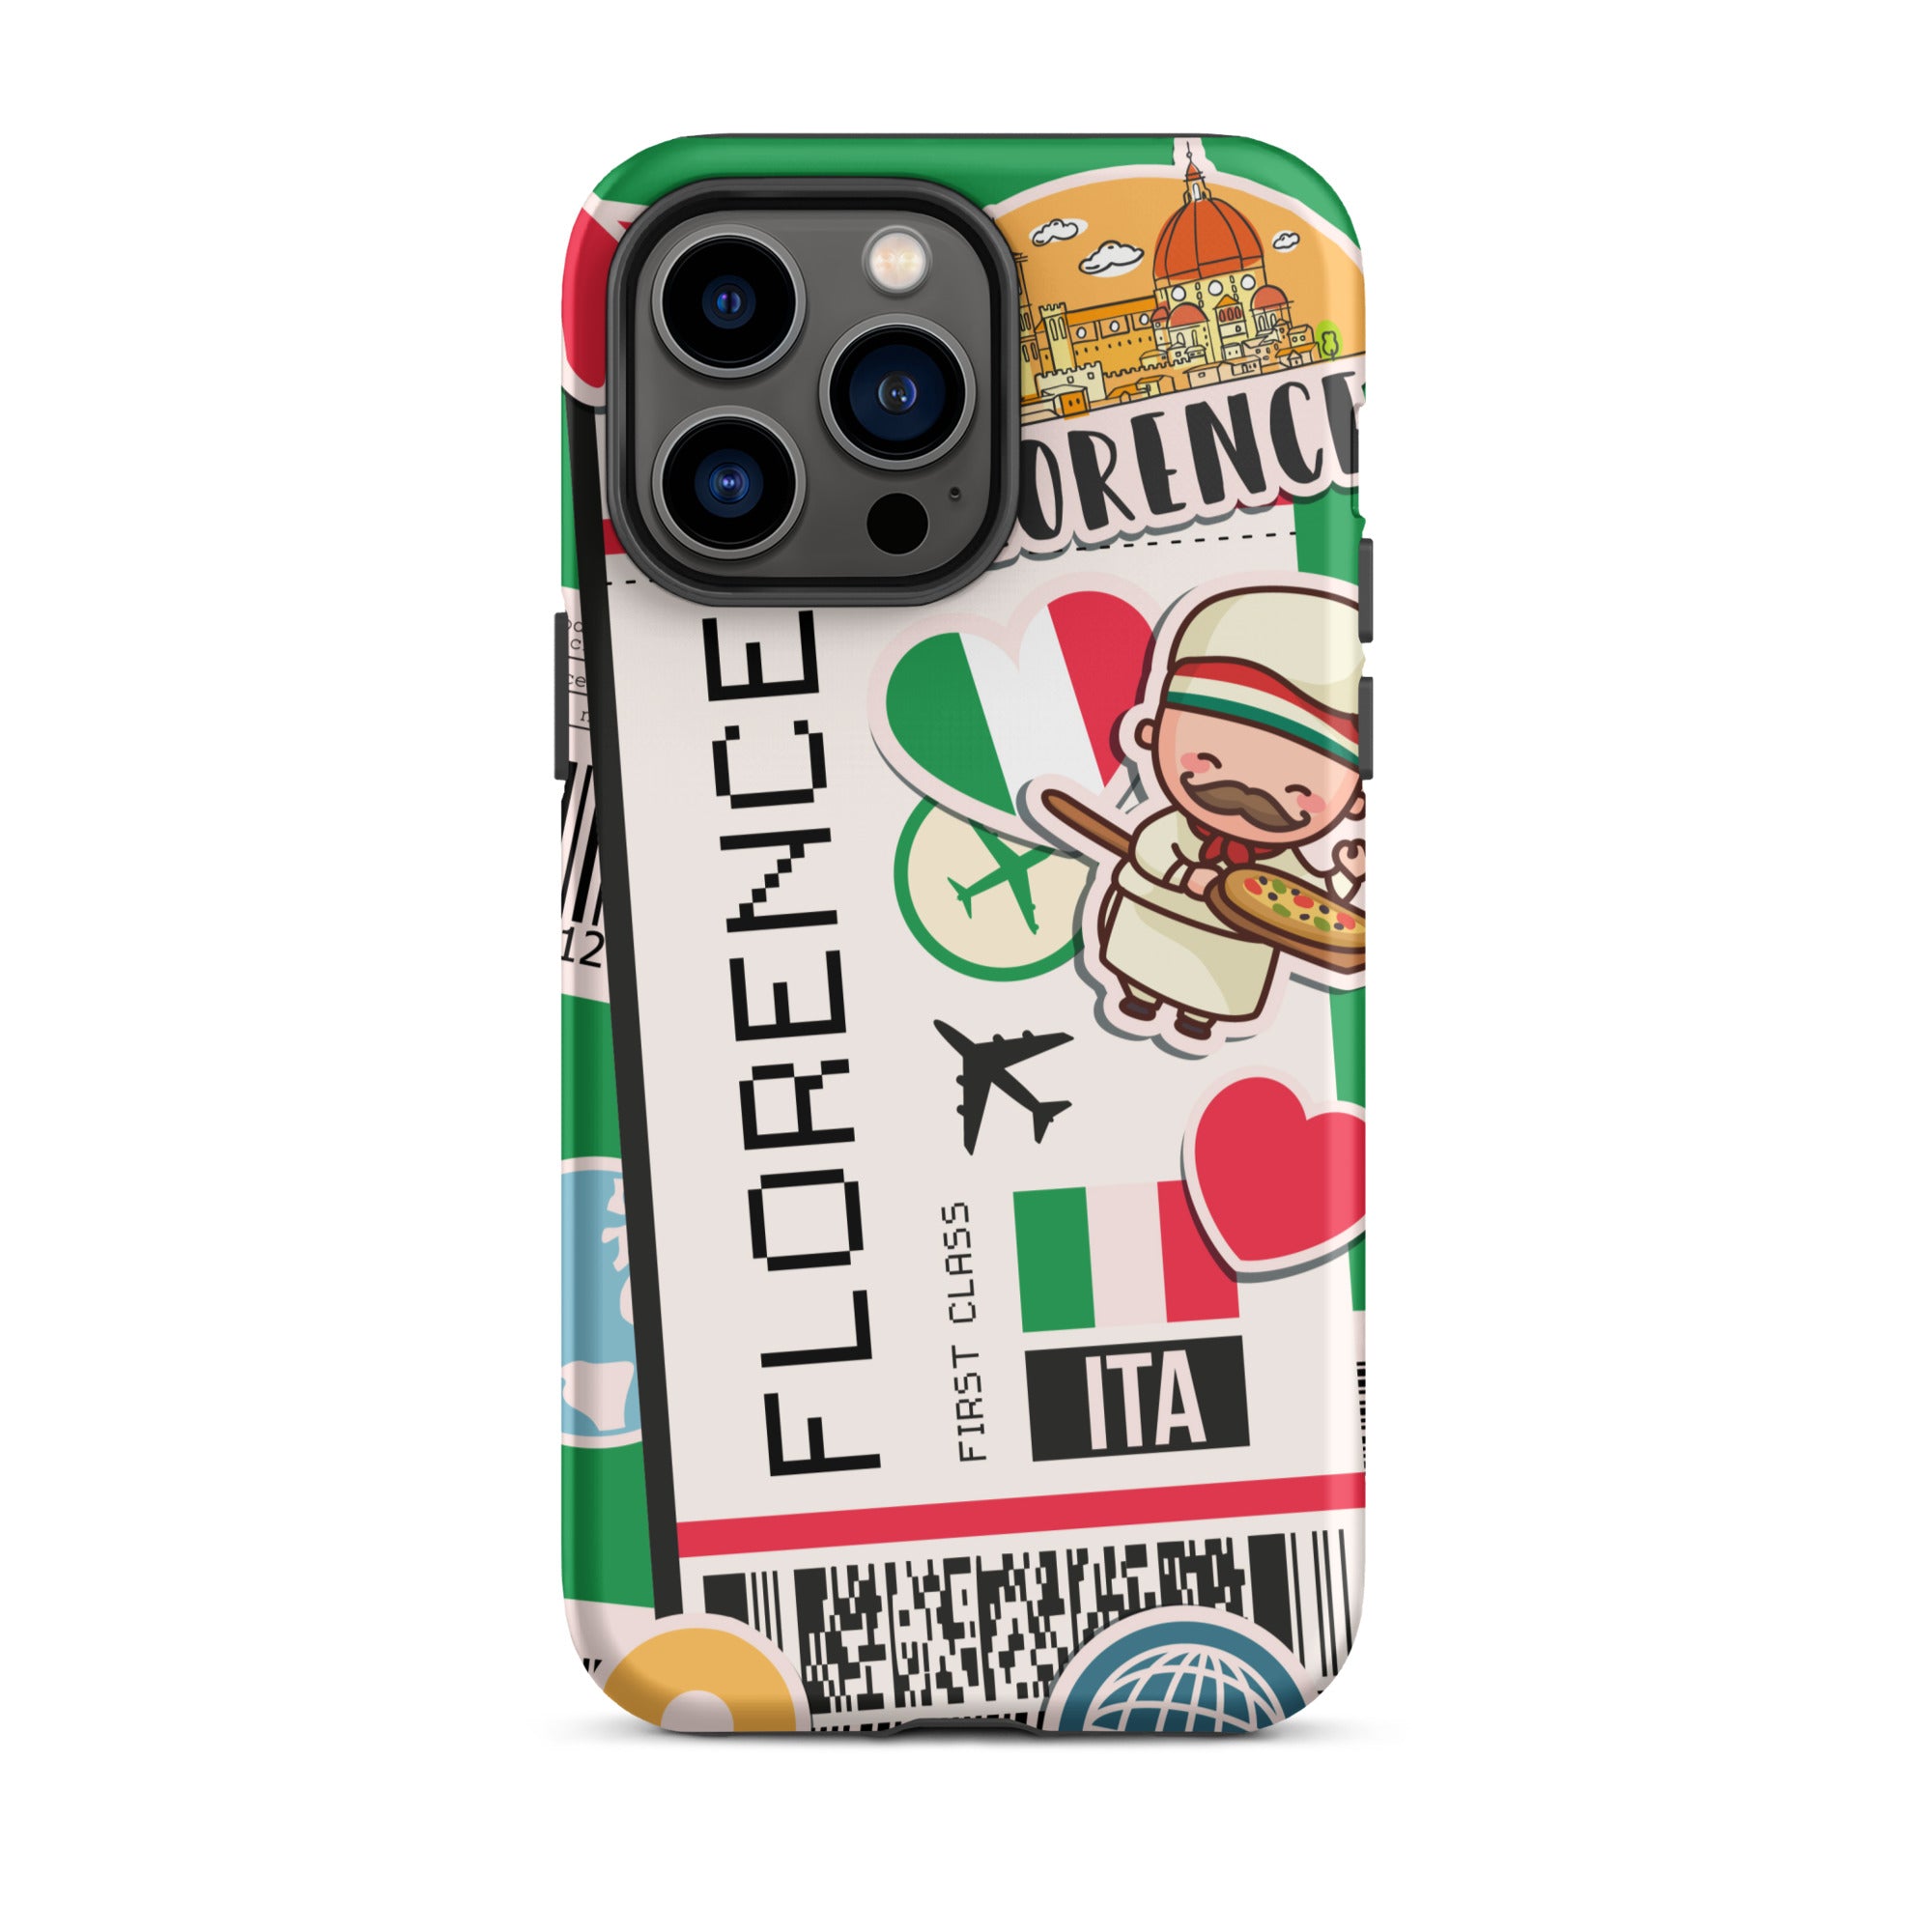 Florence Boarding Pass - iPhone® Tough Case